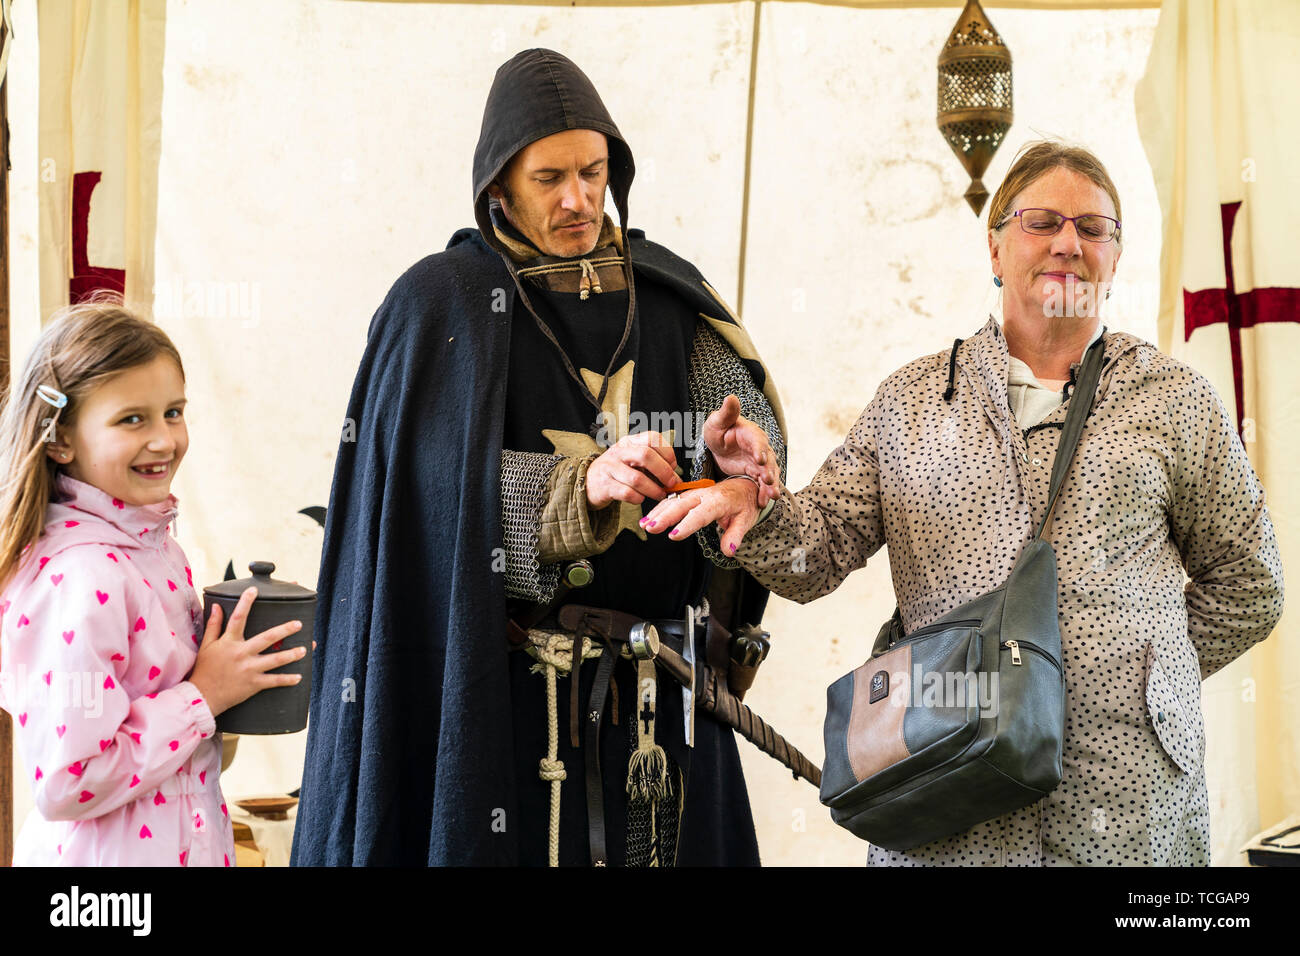 Medieval living history event. 12th century crusader in black cloak and chain mail, demonstrates the technic of 'leeching' on a mature woman member of the public with little girl, 7-8 year old, laughing next to him. Stock Photo